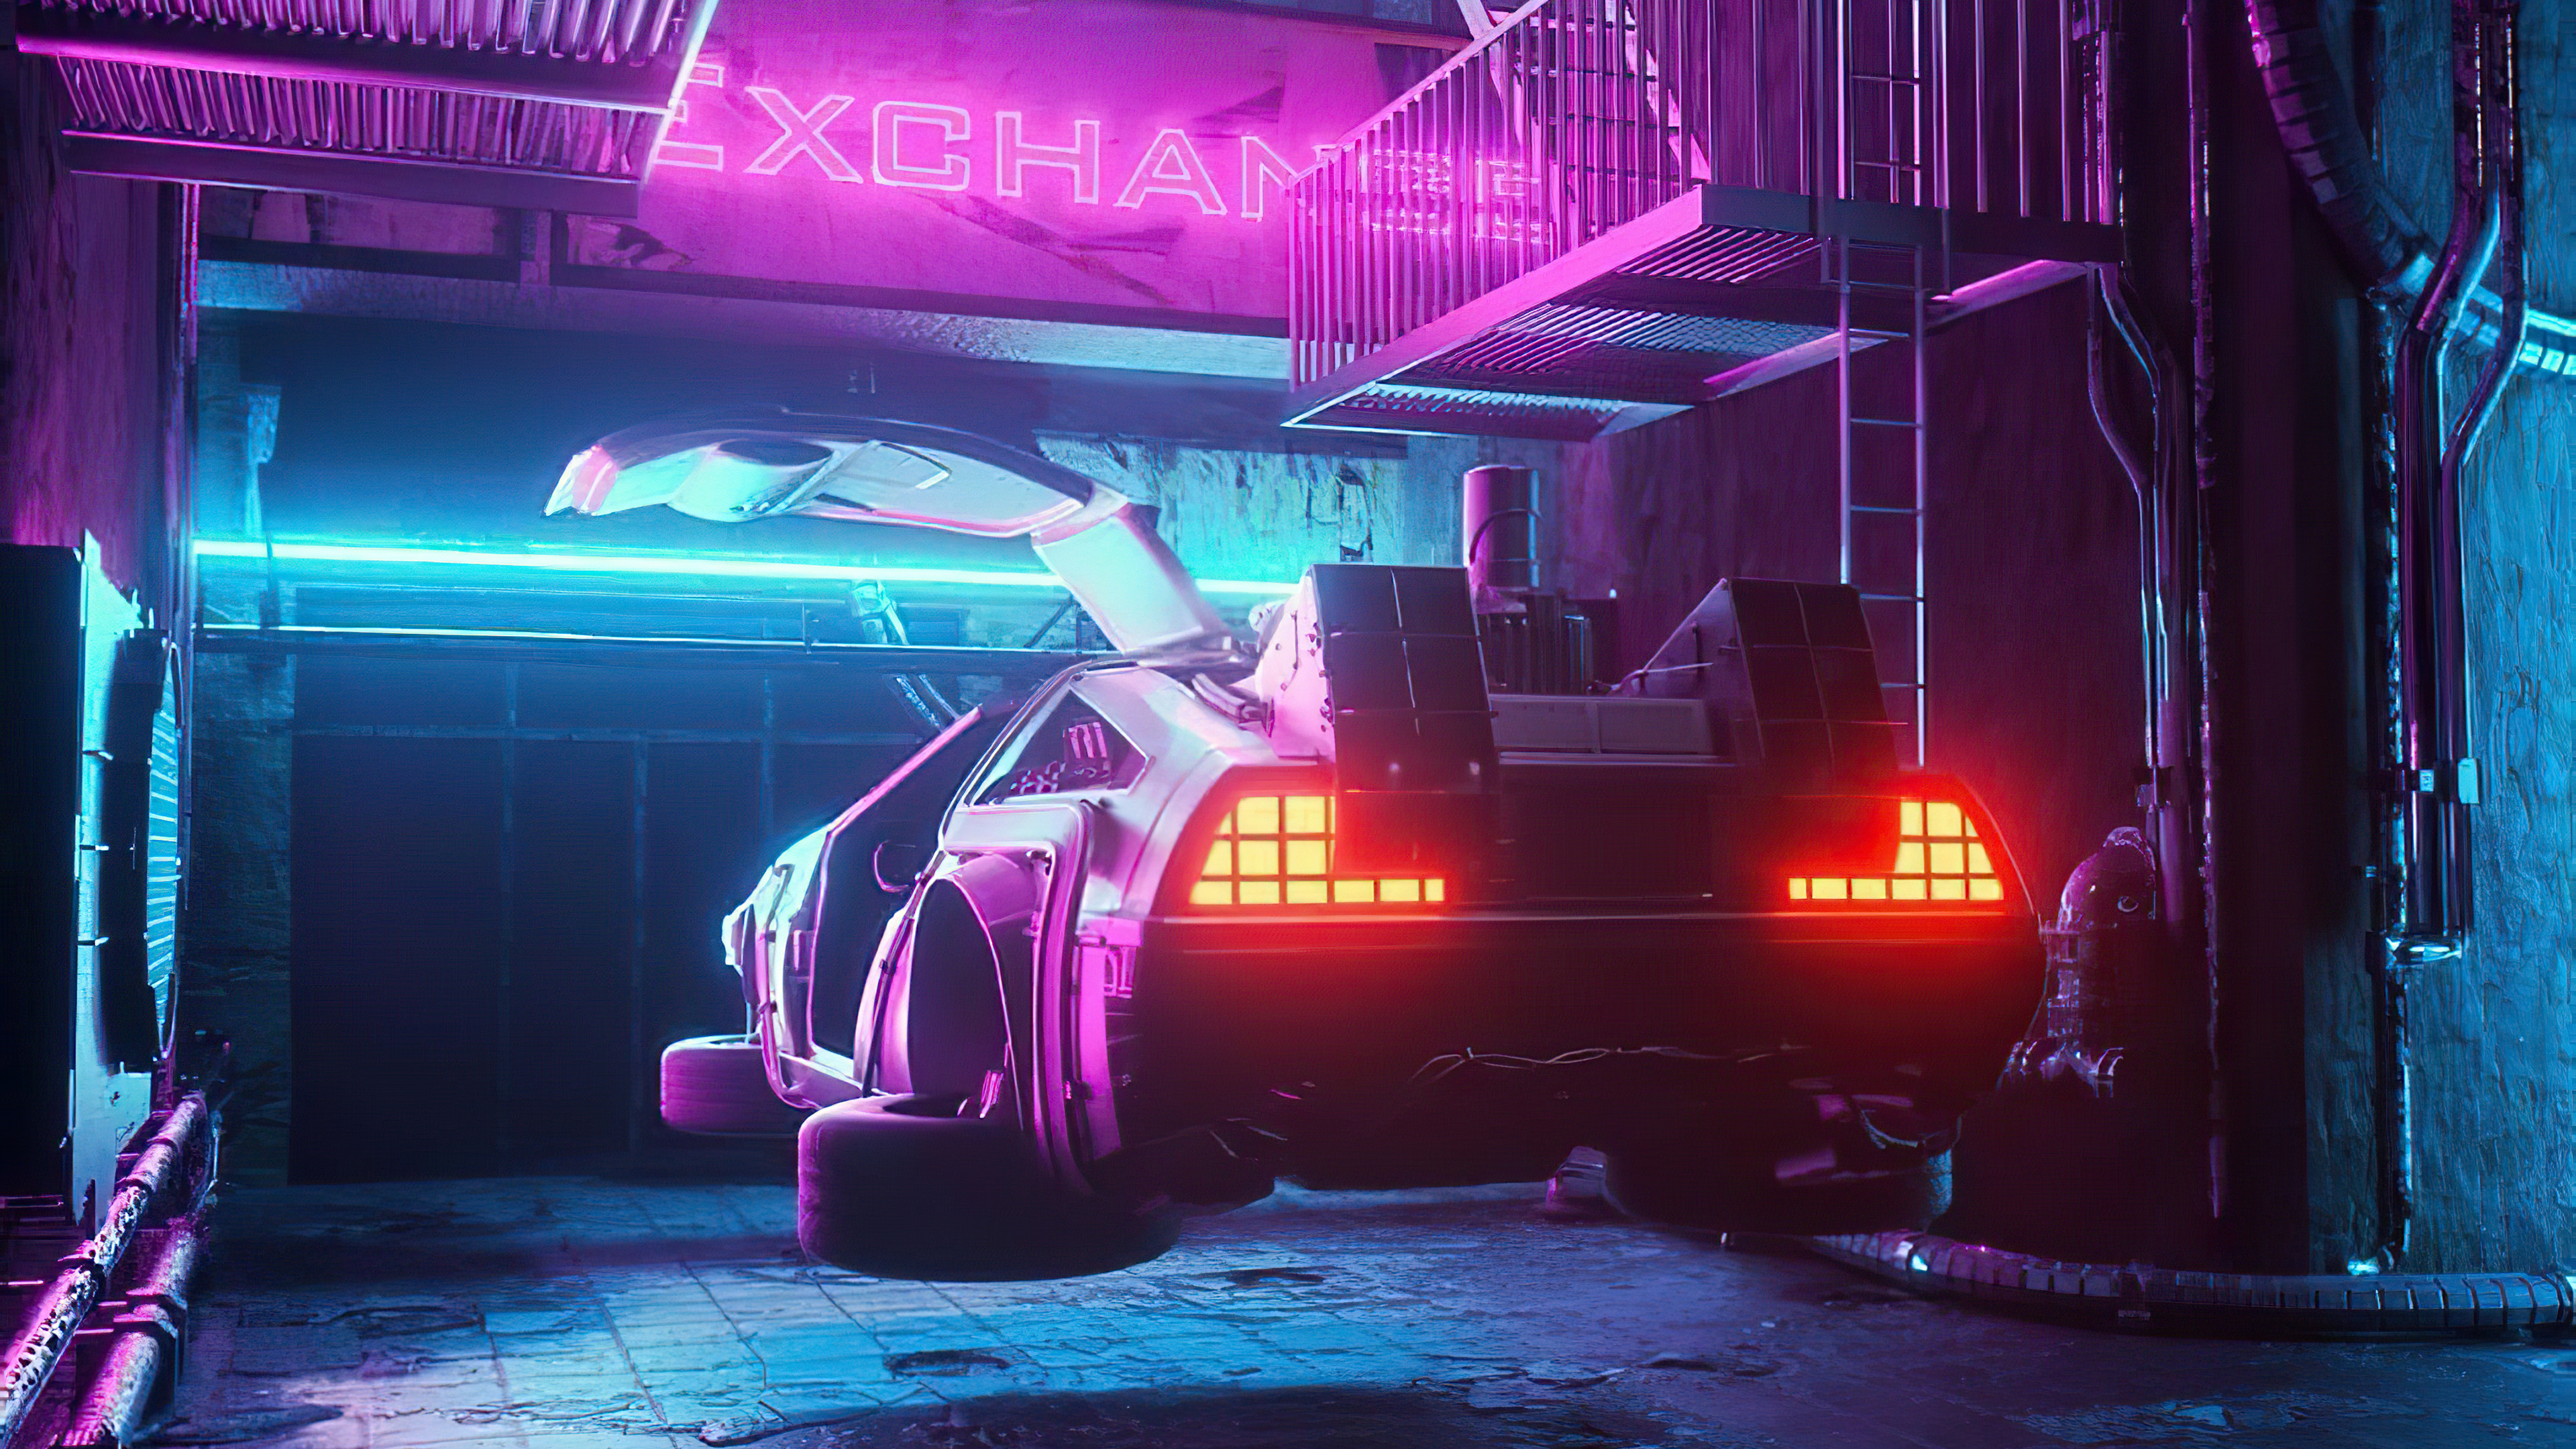 delorean iPhone X Wallpapers Free Download